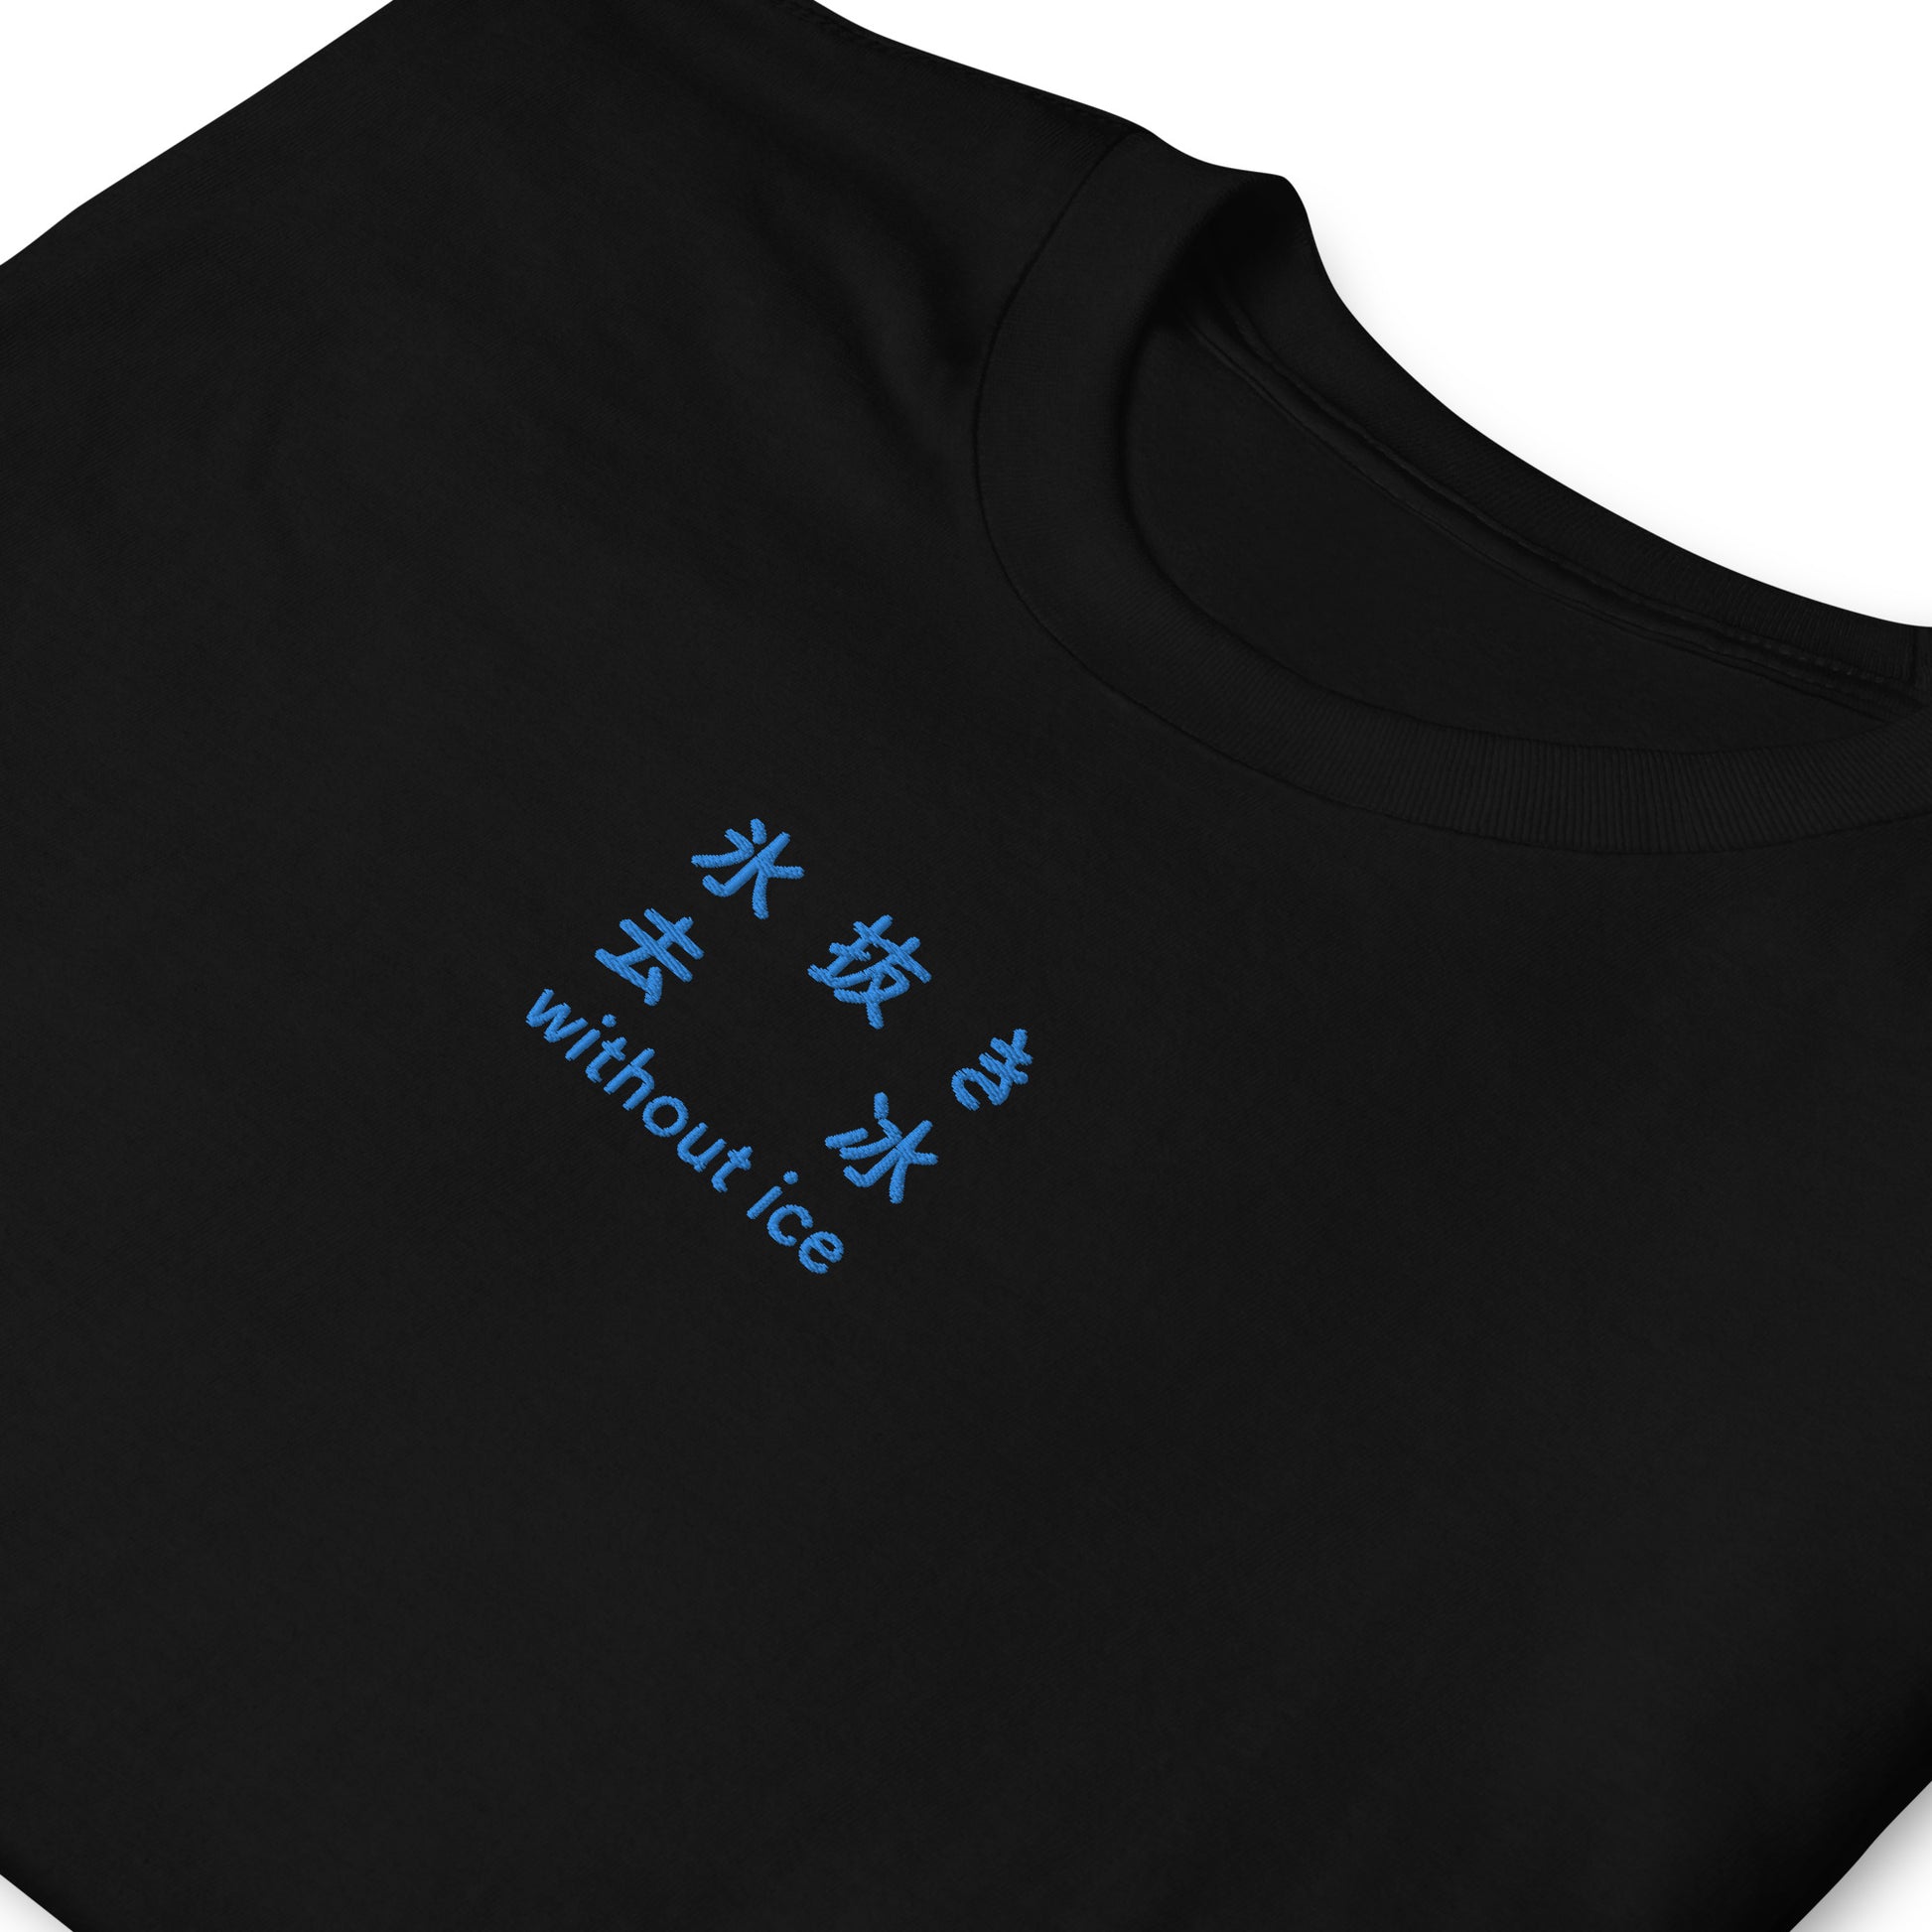 Black High Quality Tee - Front Design with an Blue Embroidery "Without Ice" in Japanese,Chinese and English